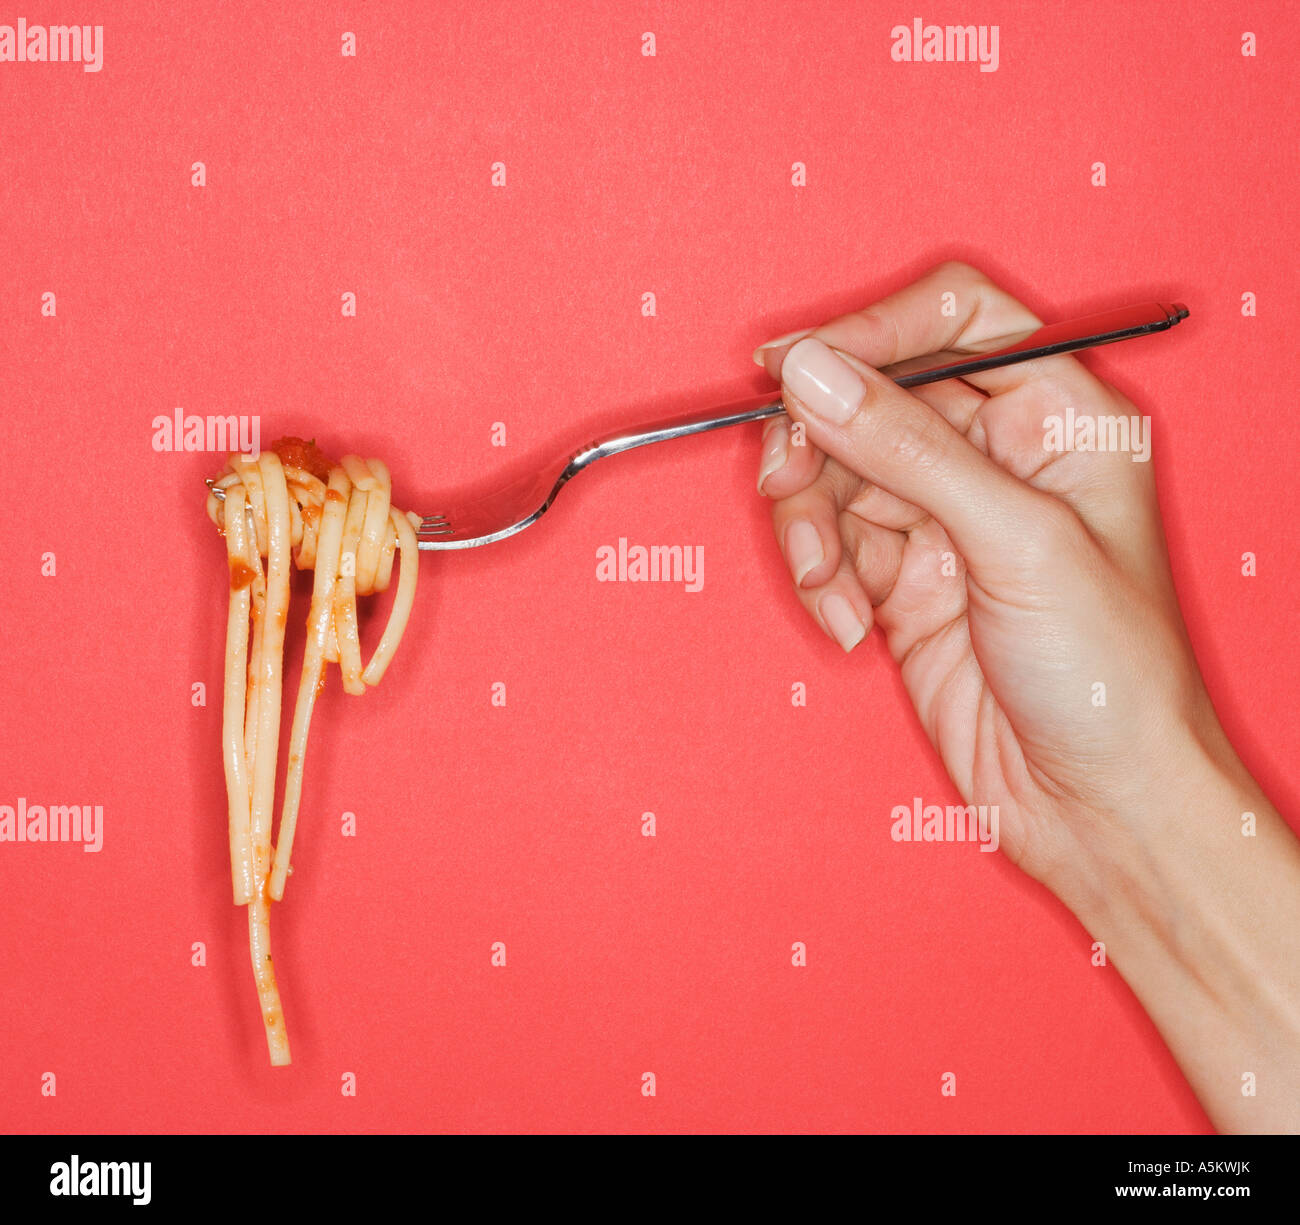 Woman holding forkful of pasta Stock Photo